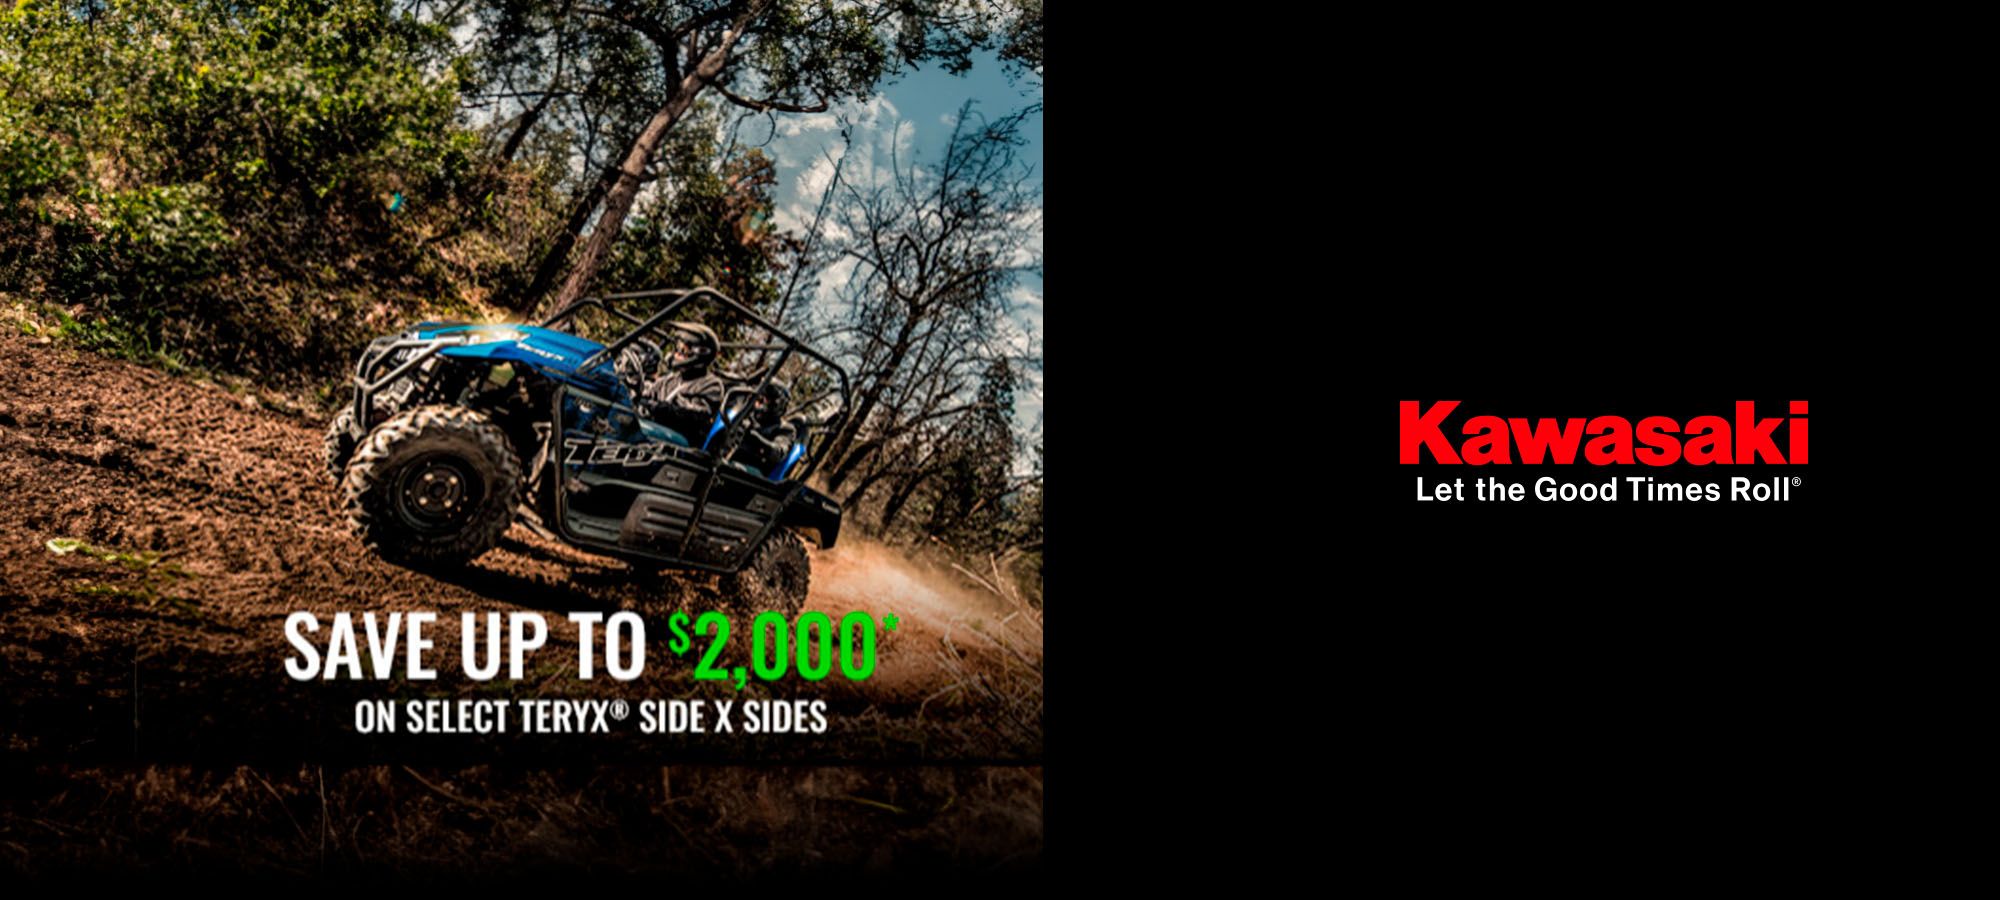 Kawasaki US - Save Up to $2,000* On Select Side X Sides at Power World Sports, Granby, CO 80446